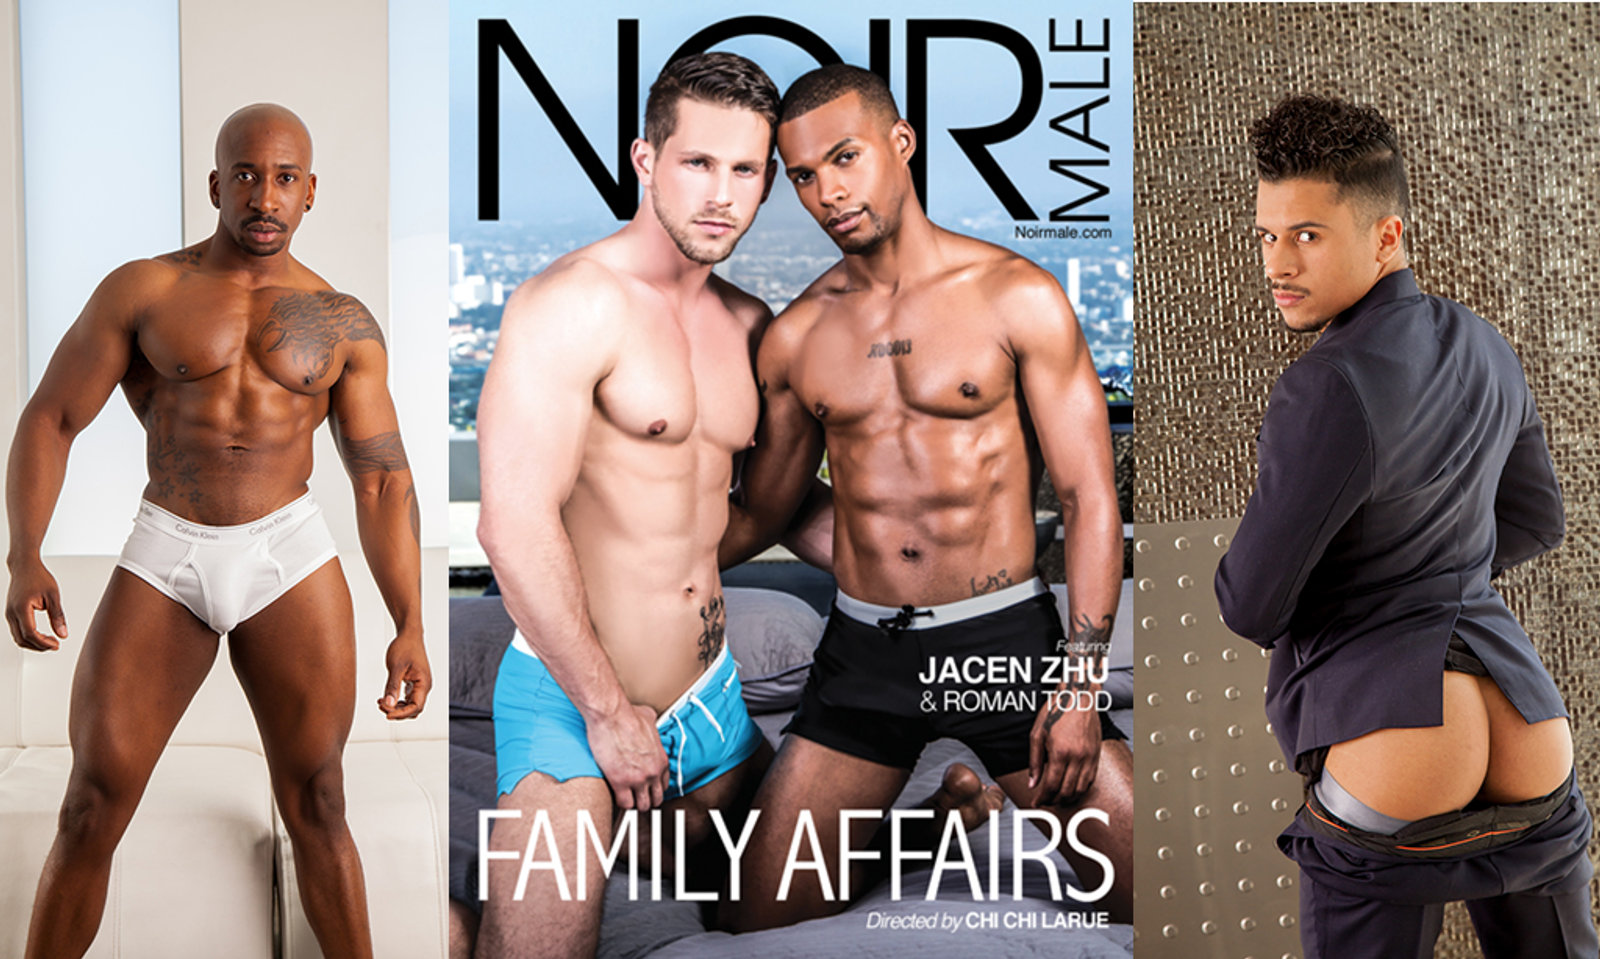 Noir Male Celebrates December With ‘Family Affairs,’ Model Debuts